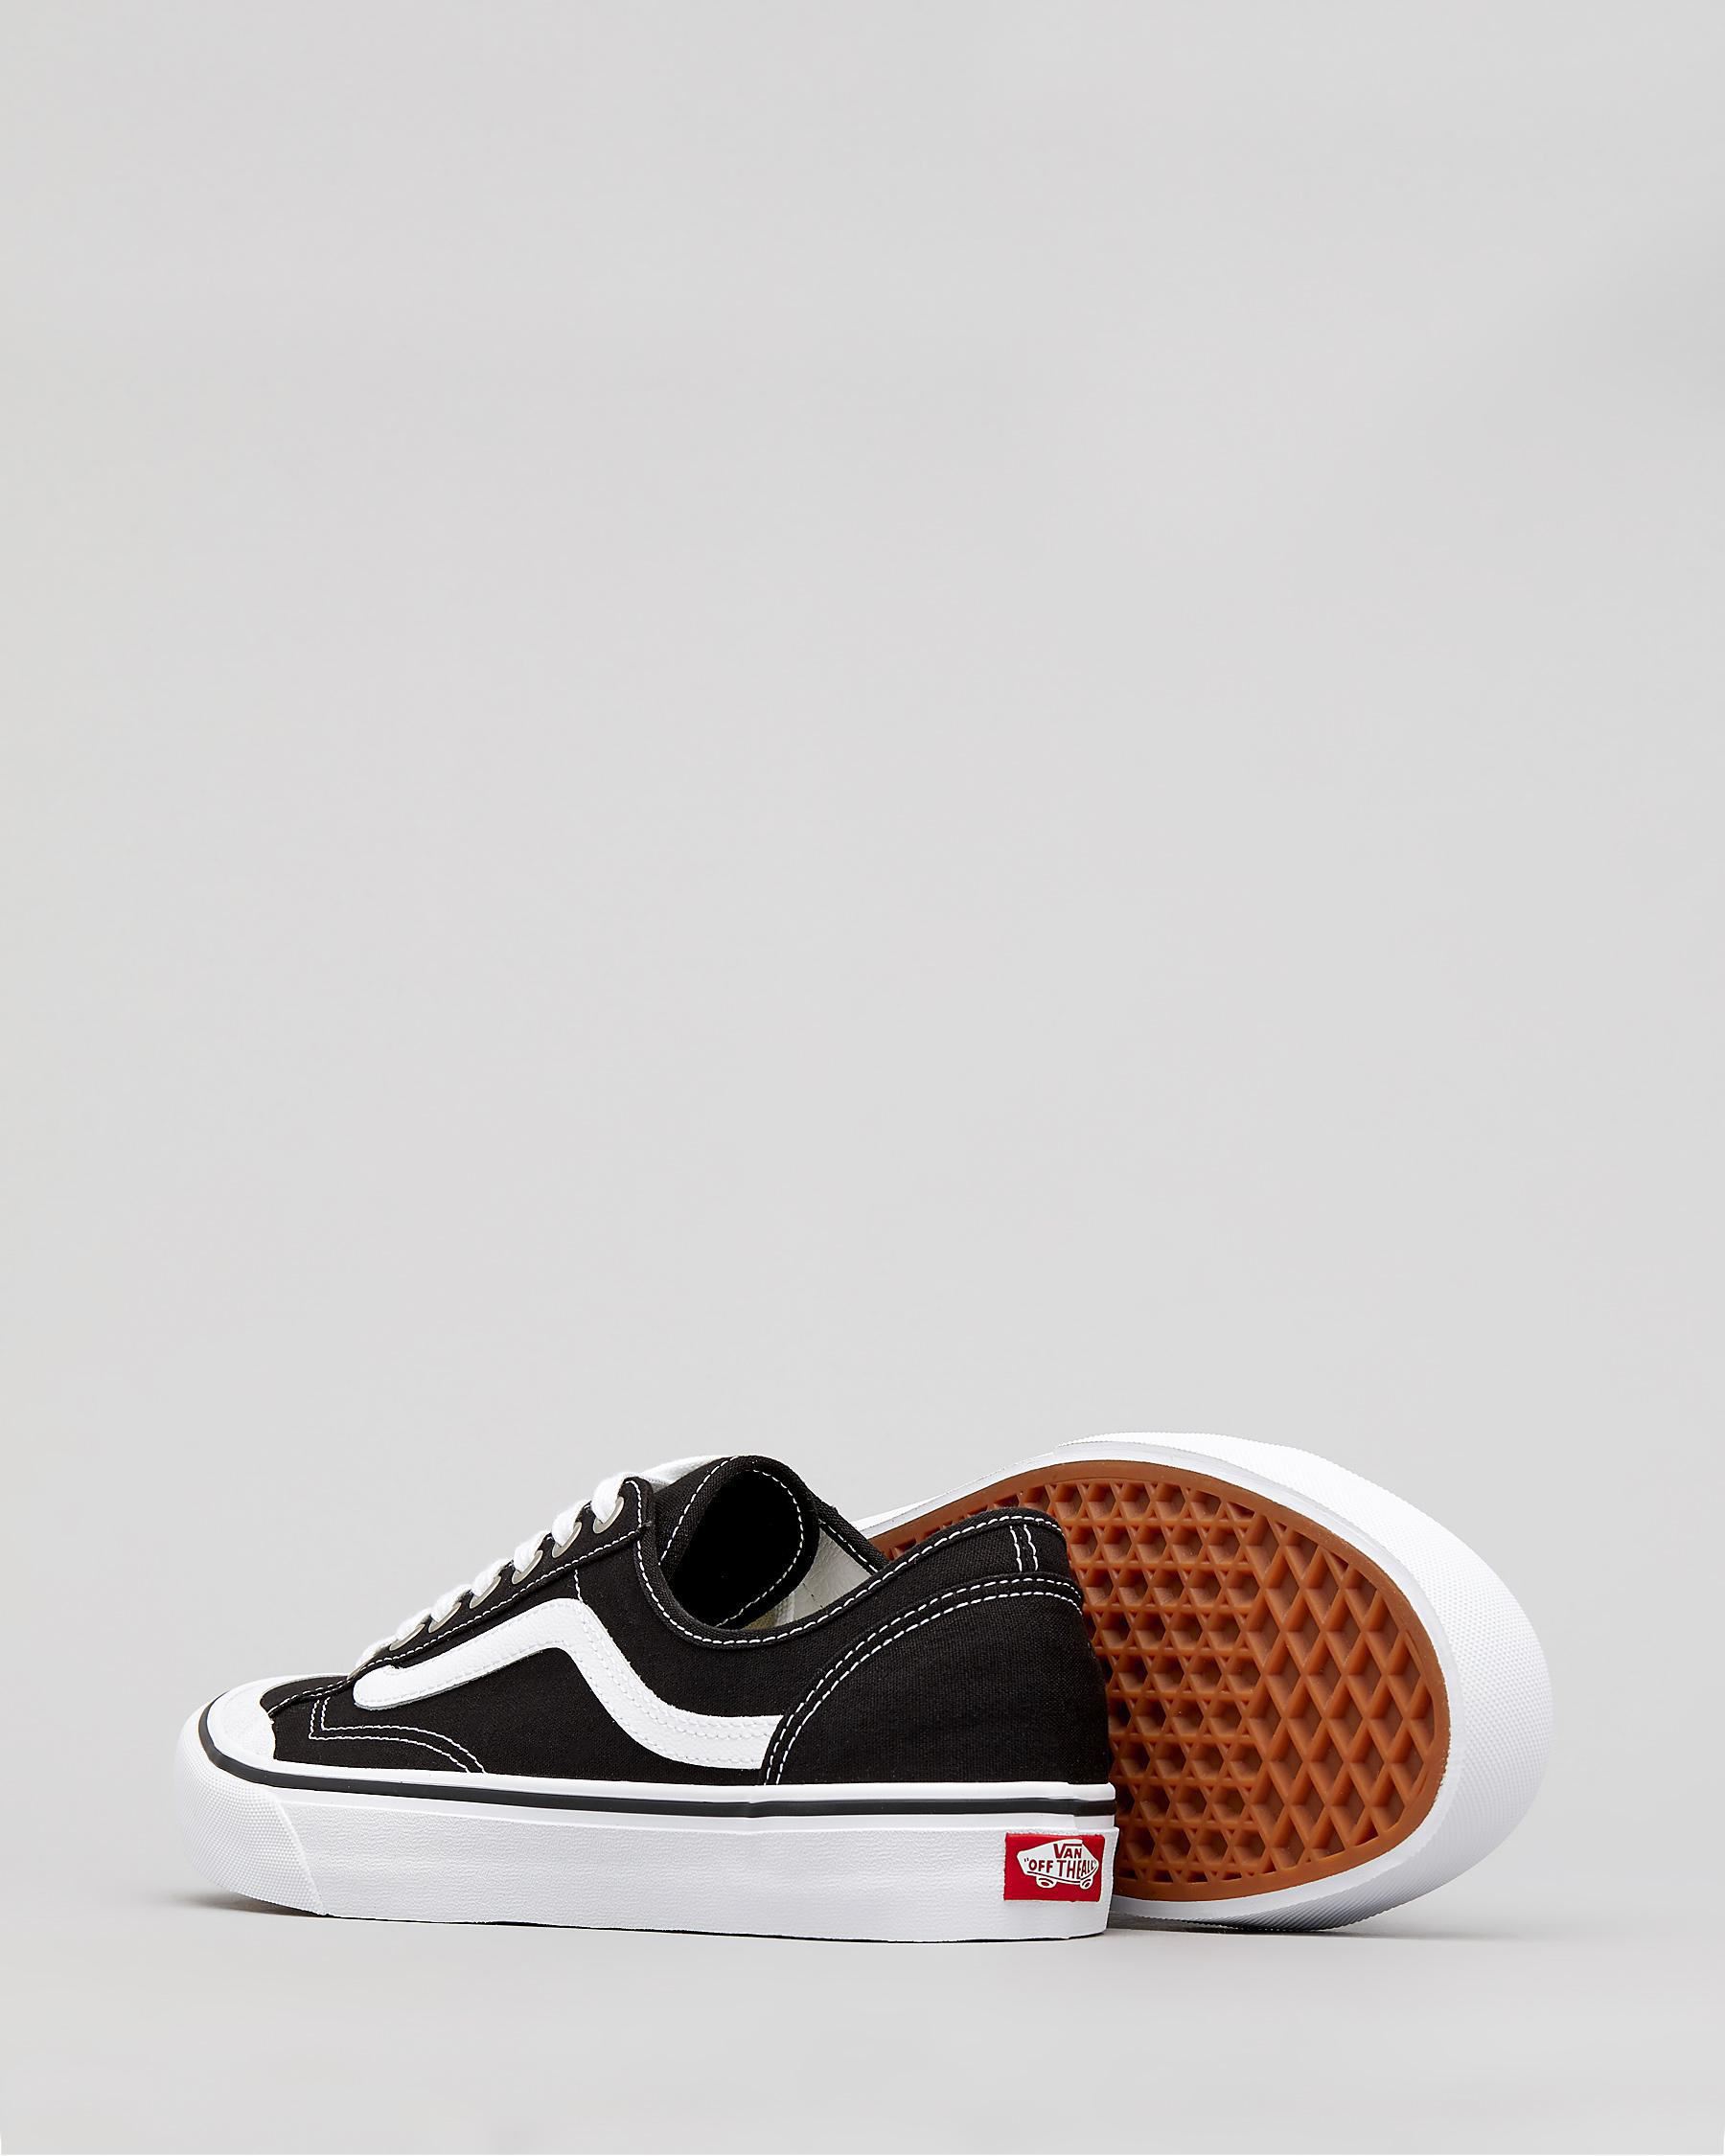 Shop Vans Style 36 Decon SF Shoes In Black/white - Fast Shipping & Easy ...